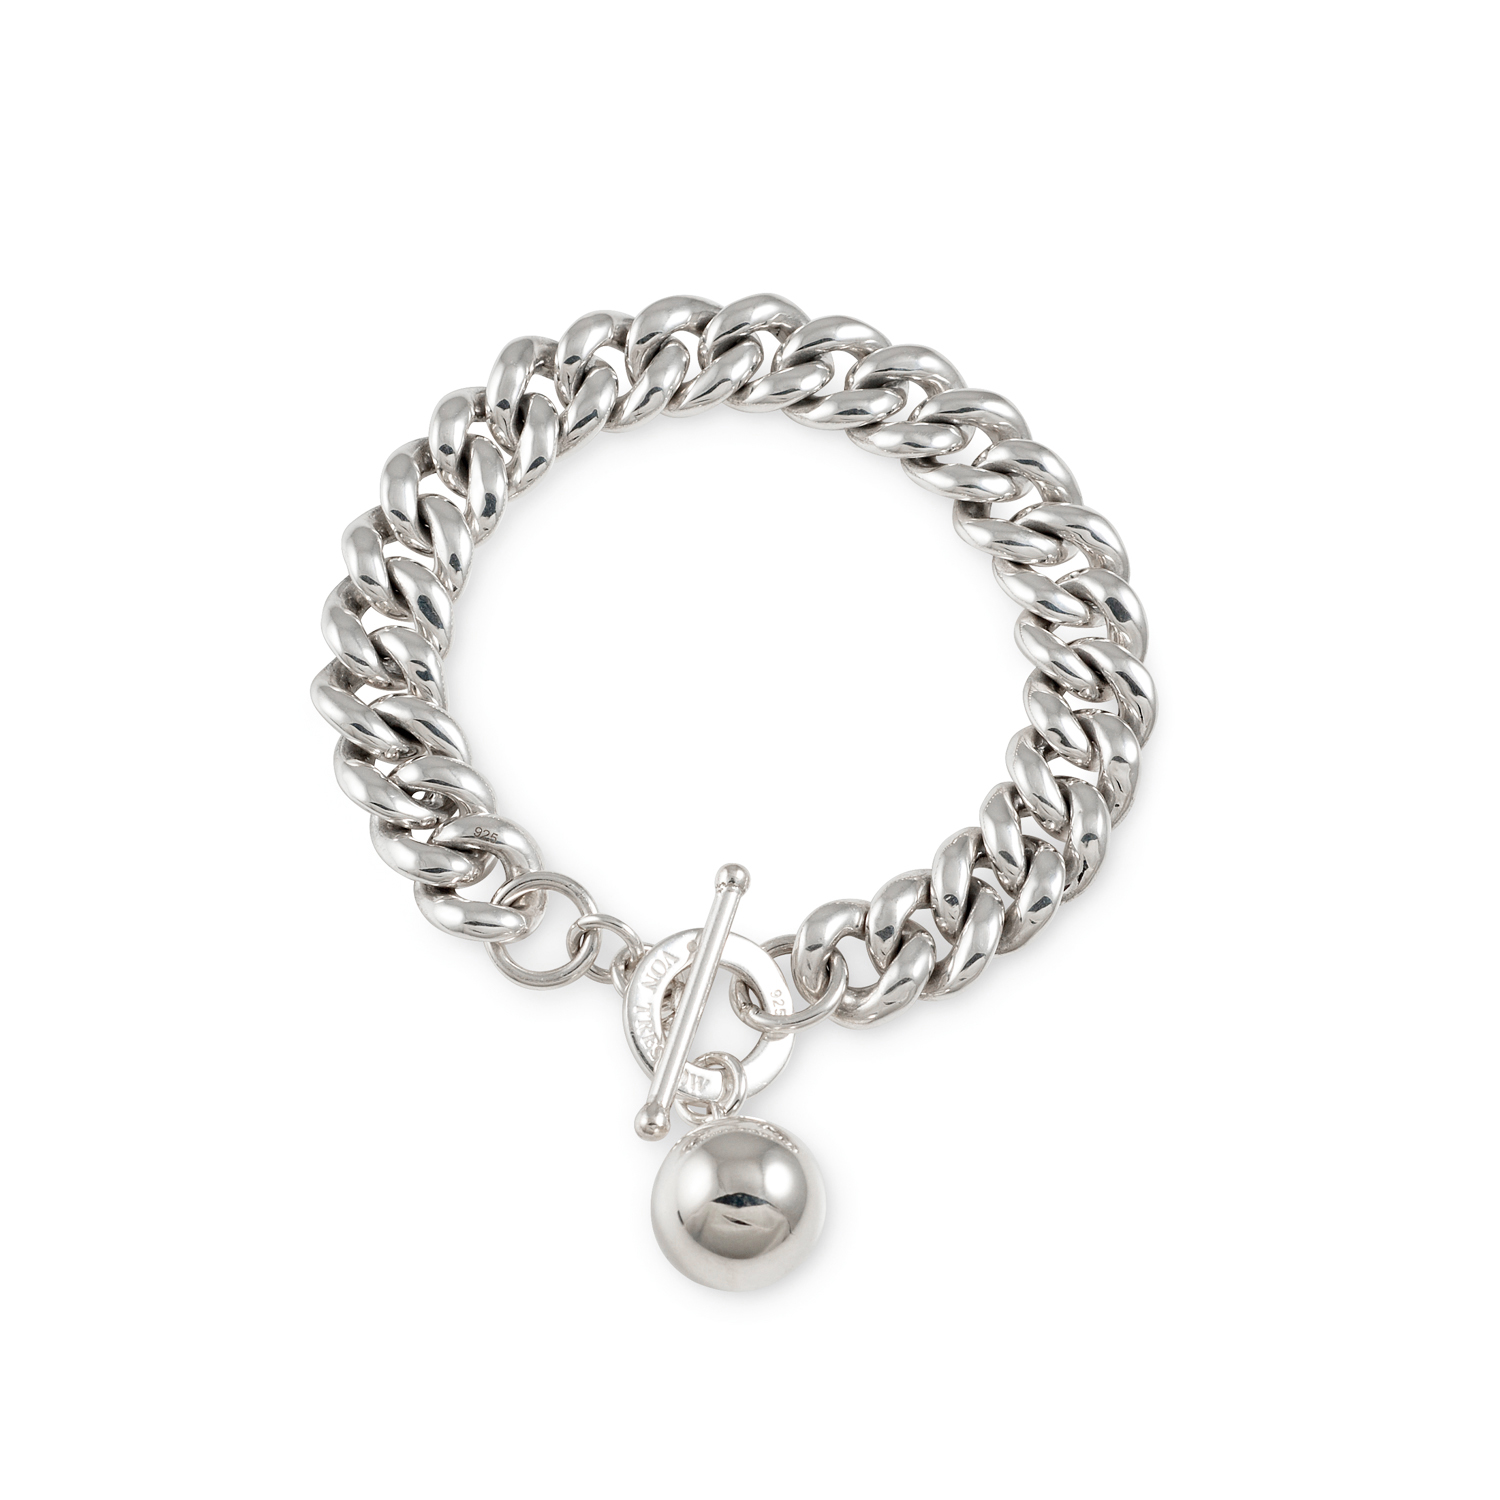 Small Mama Bracelet with VT Disc & Chime Ball - Von Treskow